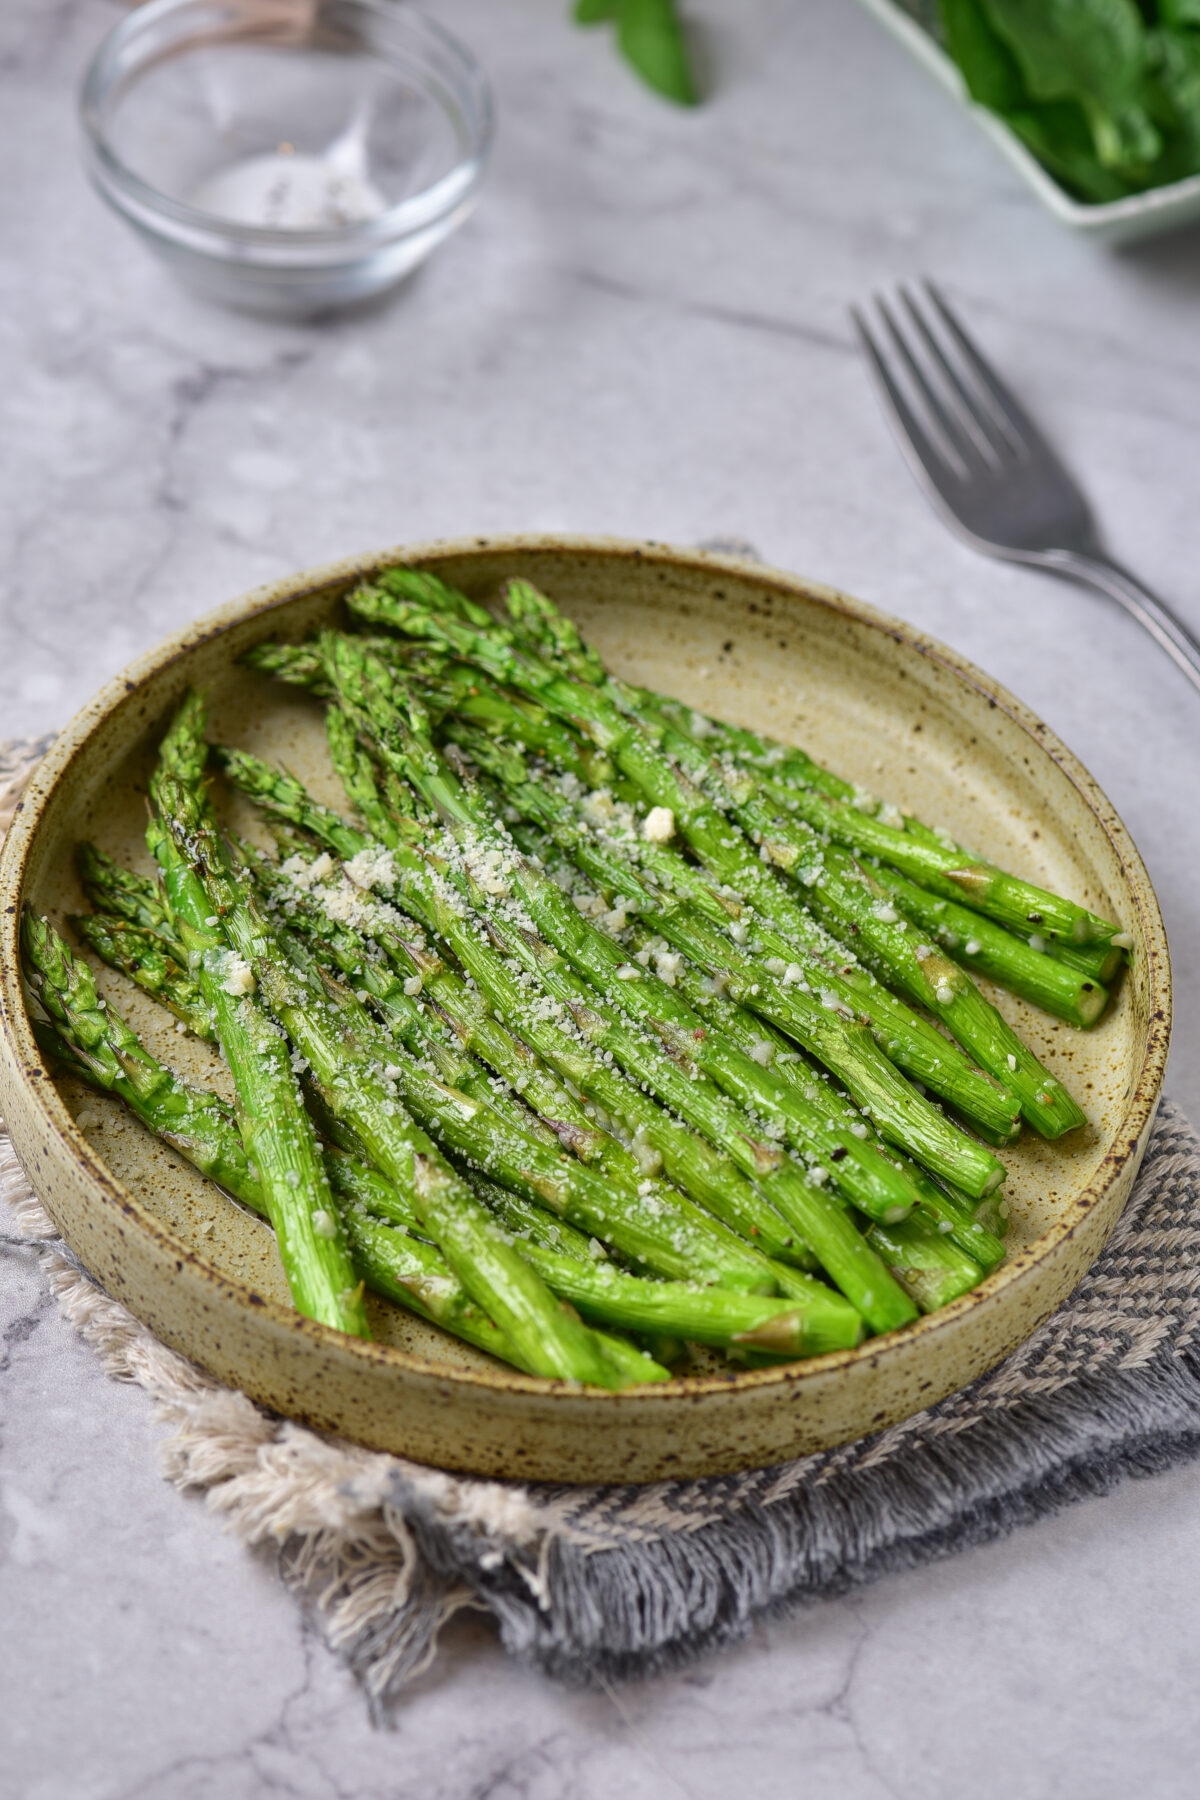 Enjoy perfect air fryer asparagus with our easy recipe for crisp, golden, and tasty asparagus. It's the ideal side dish for any occasion.